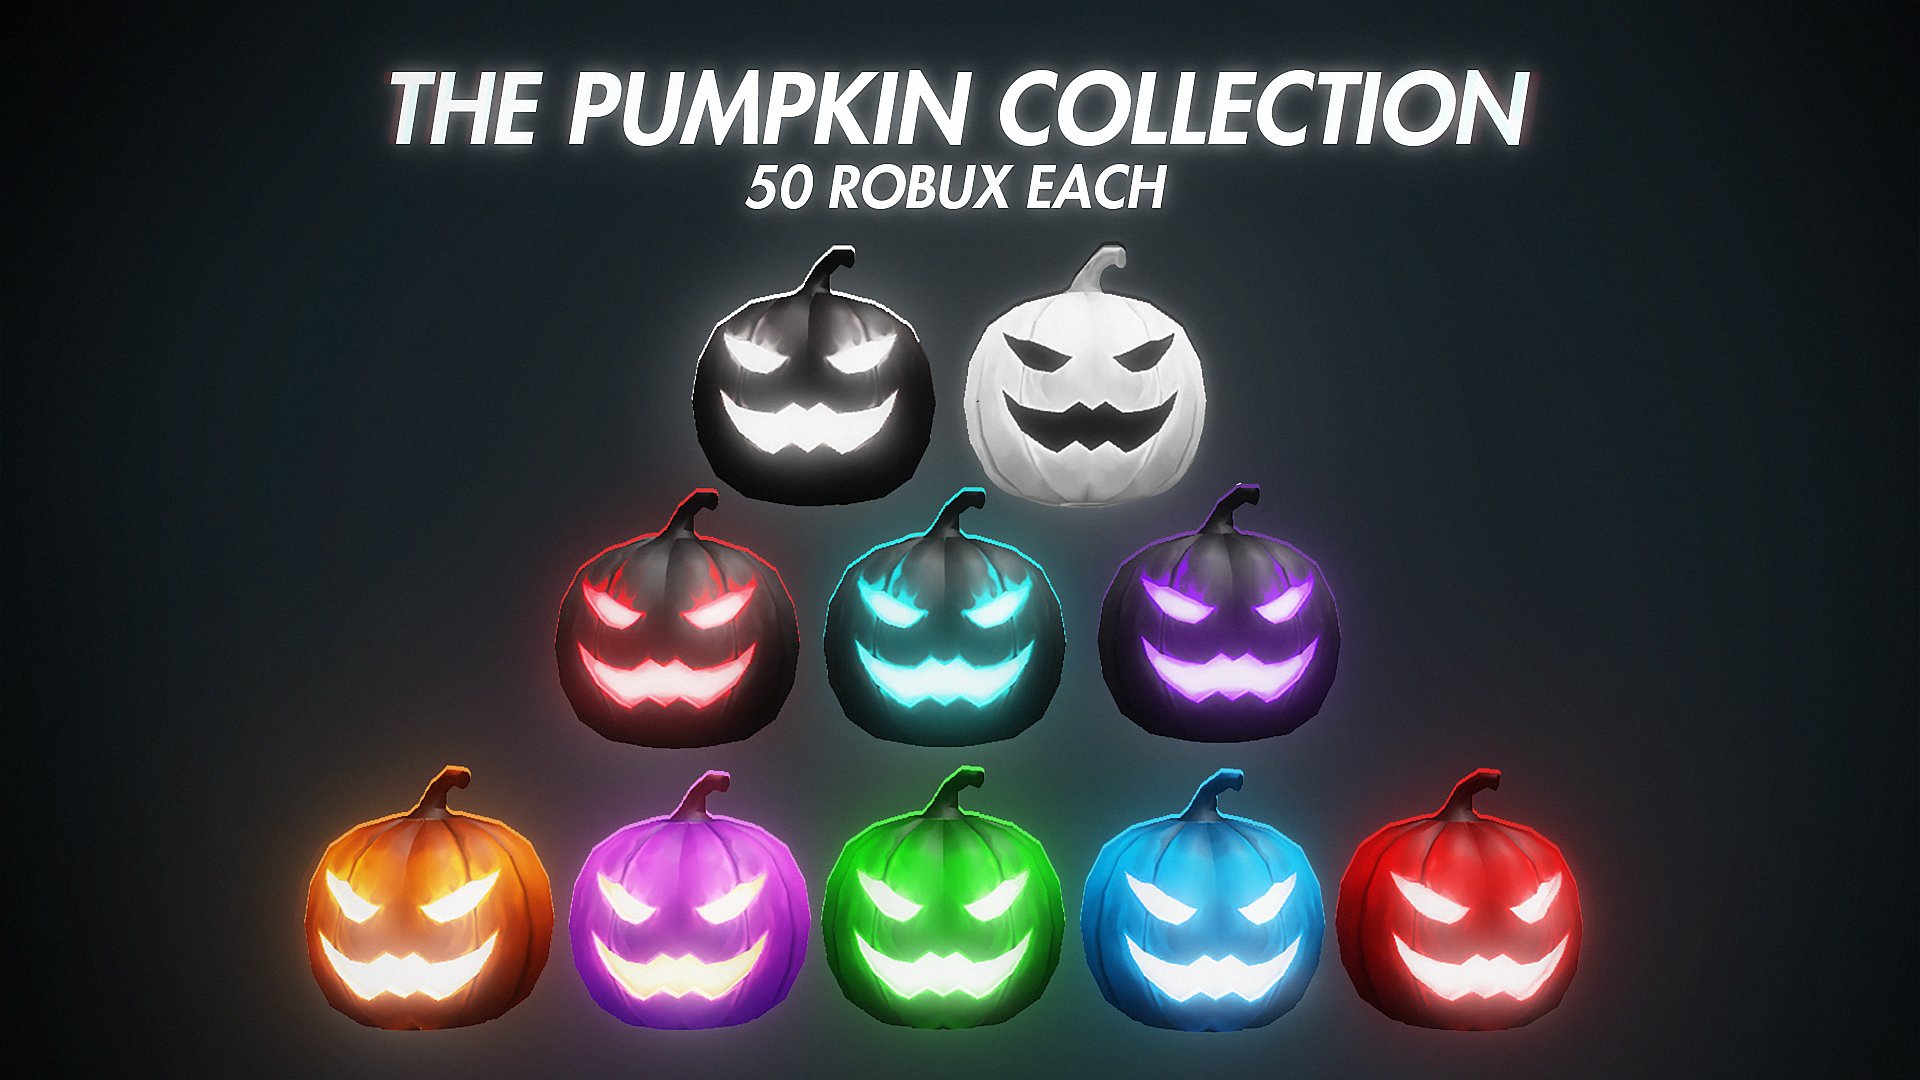 Idhau On Twitter The Pumpkin Collection Is On Sale Now Https T Co Ttqu7gbow7 Https T Co Hxhcsdv1no Https T Co Q9unau2y6v Https T Co Wmwk7byqhq Https T Co Zl9joi7zaa Robloxugc Roblox Https T Co Ycyipnryjw - getting robux from pumkin game